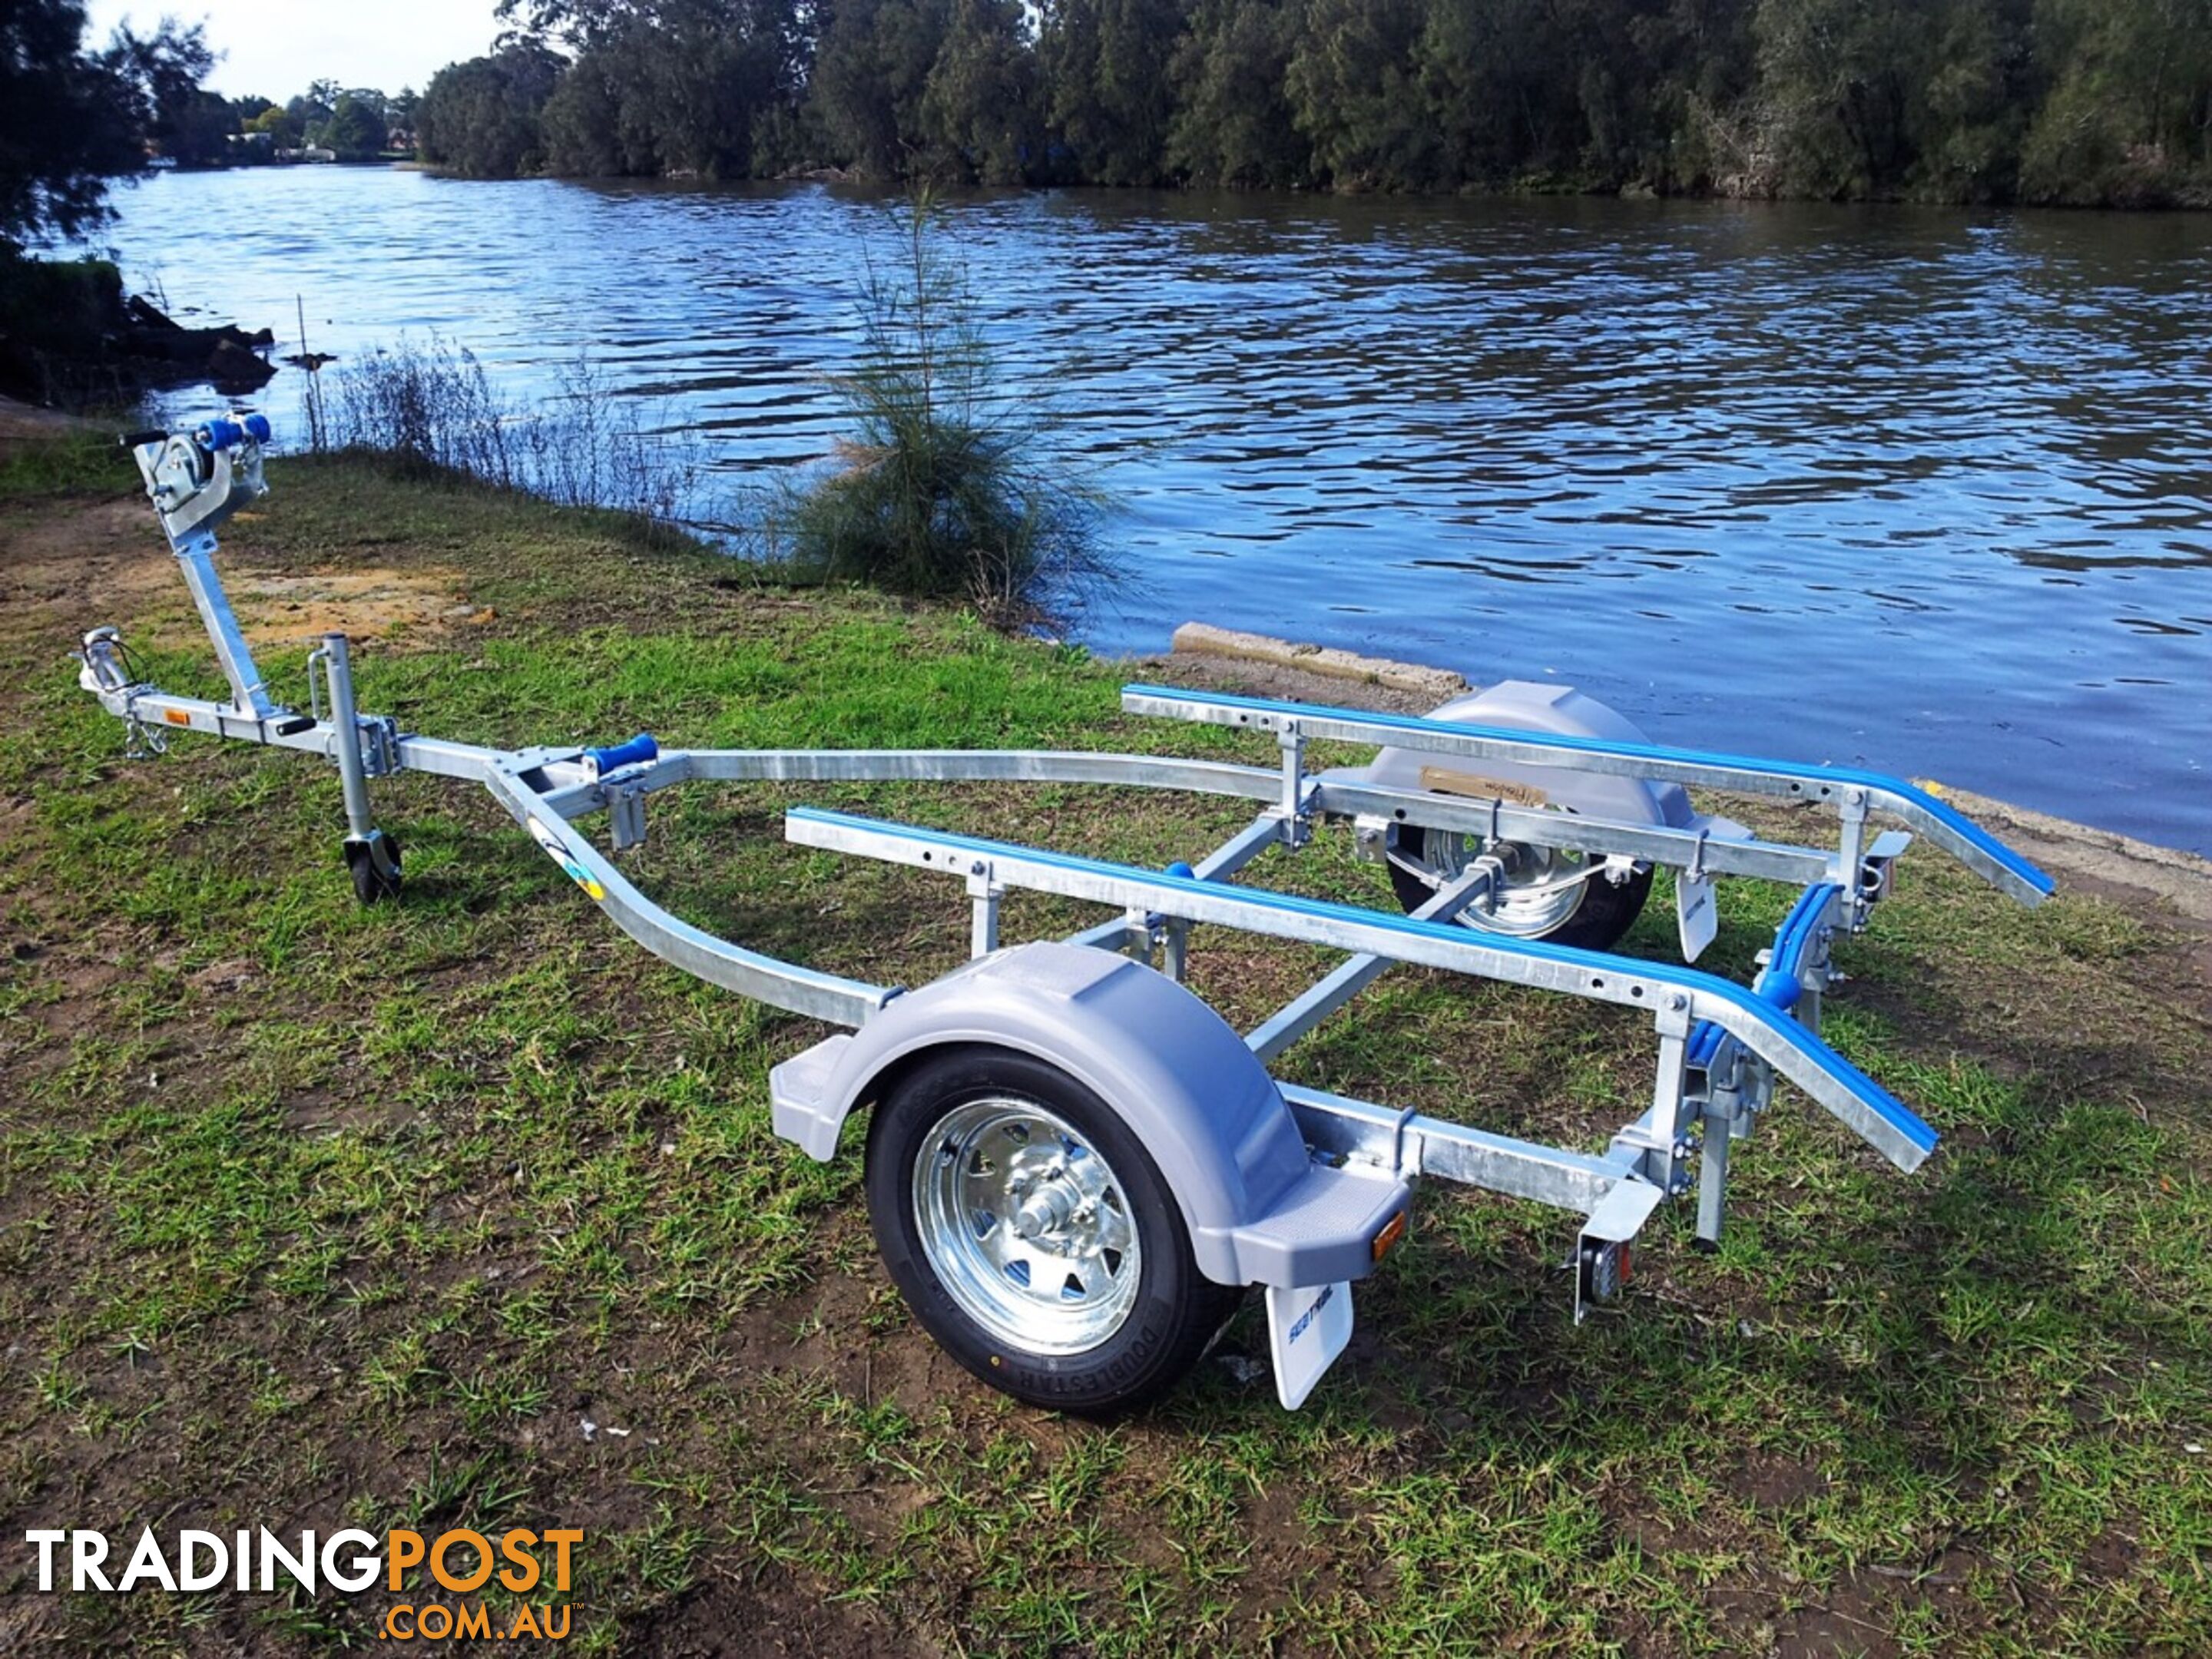 GAL BOAT TRAILER TO SUIT UP TO 5.0 mt ALUMINIUM HULL TARE 220 kg ATM 749 kg